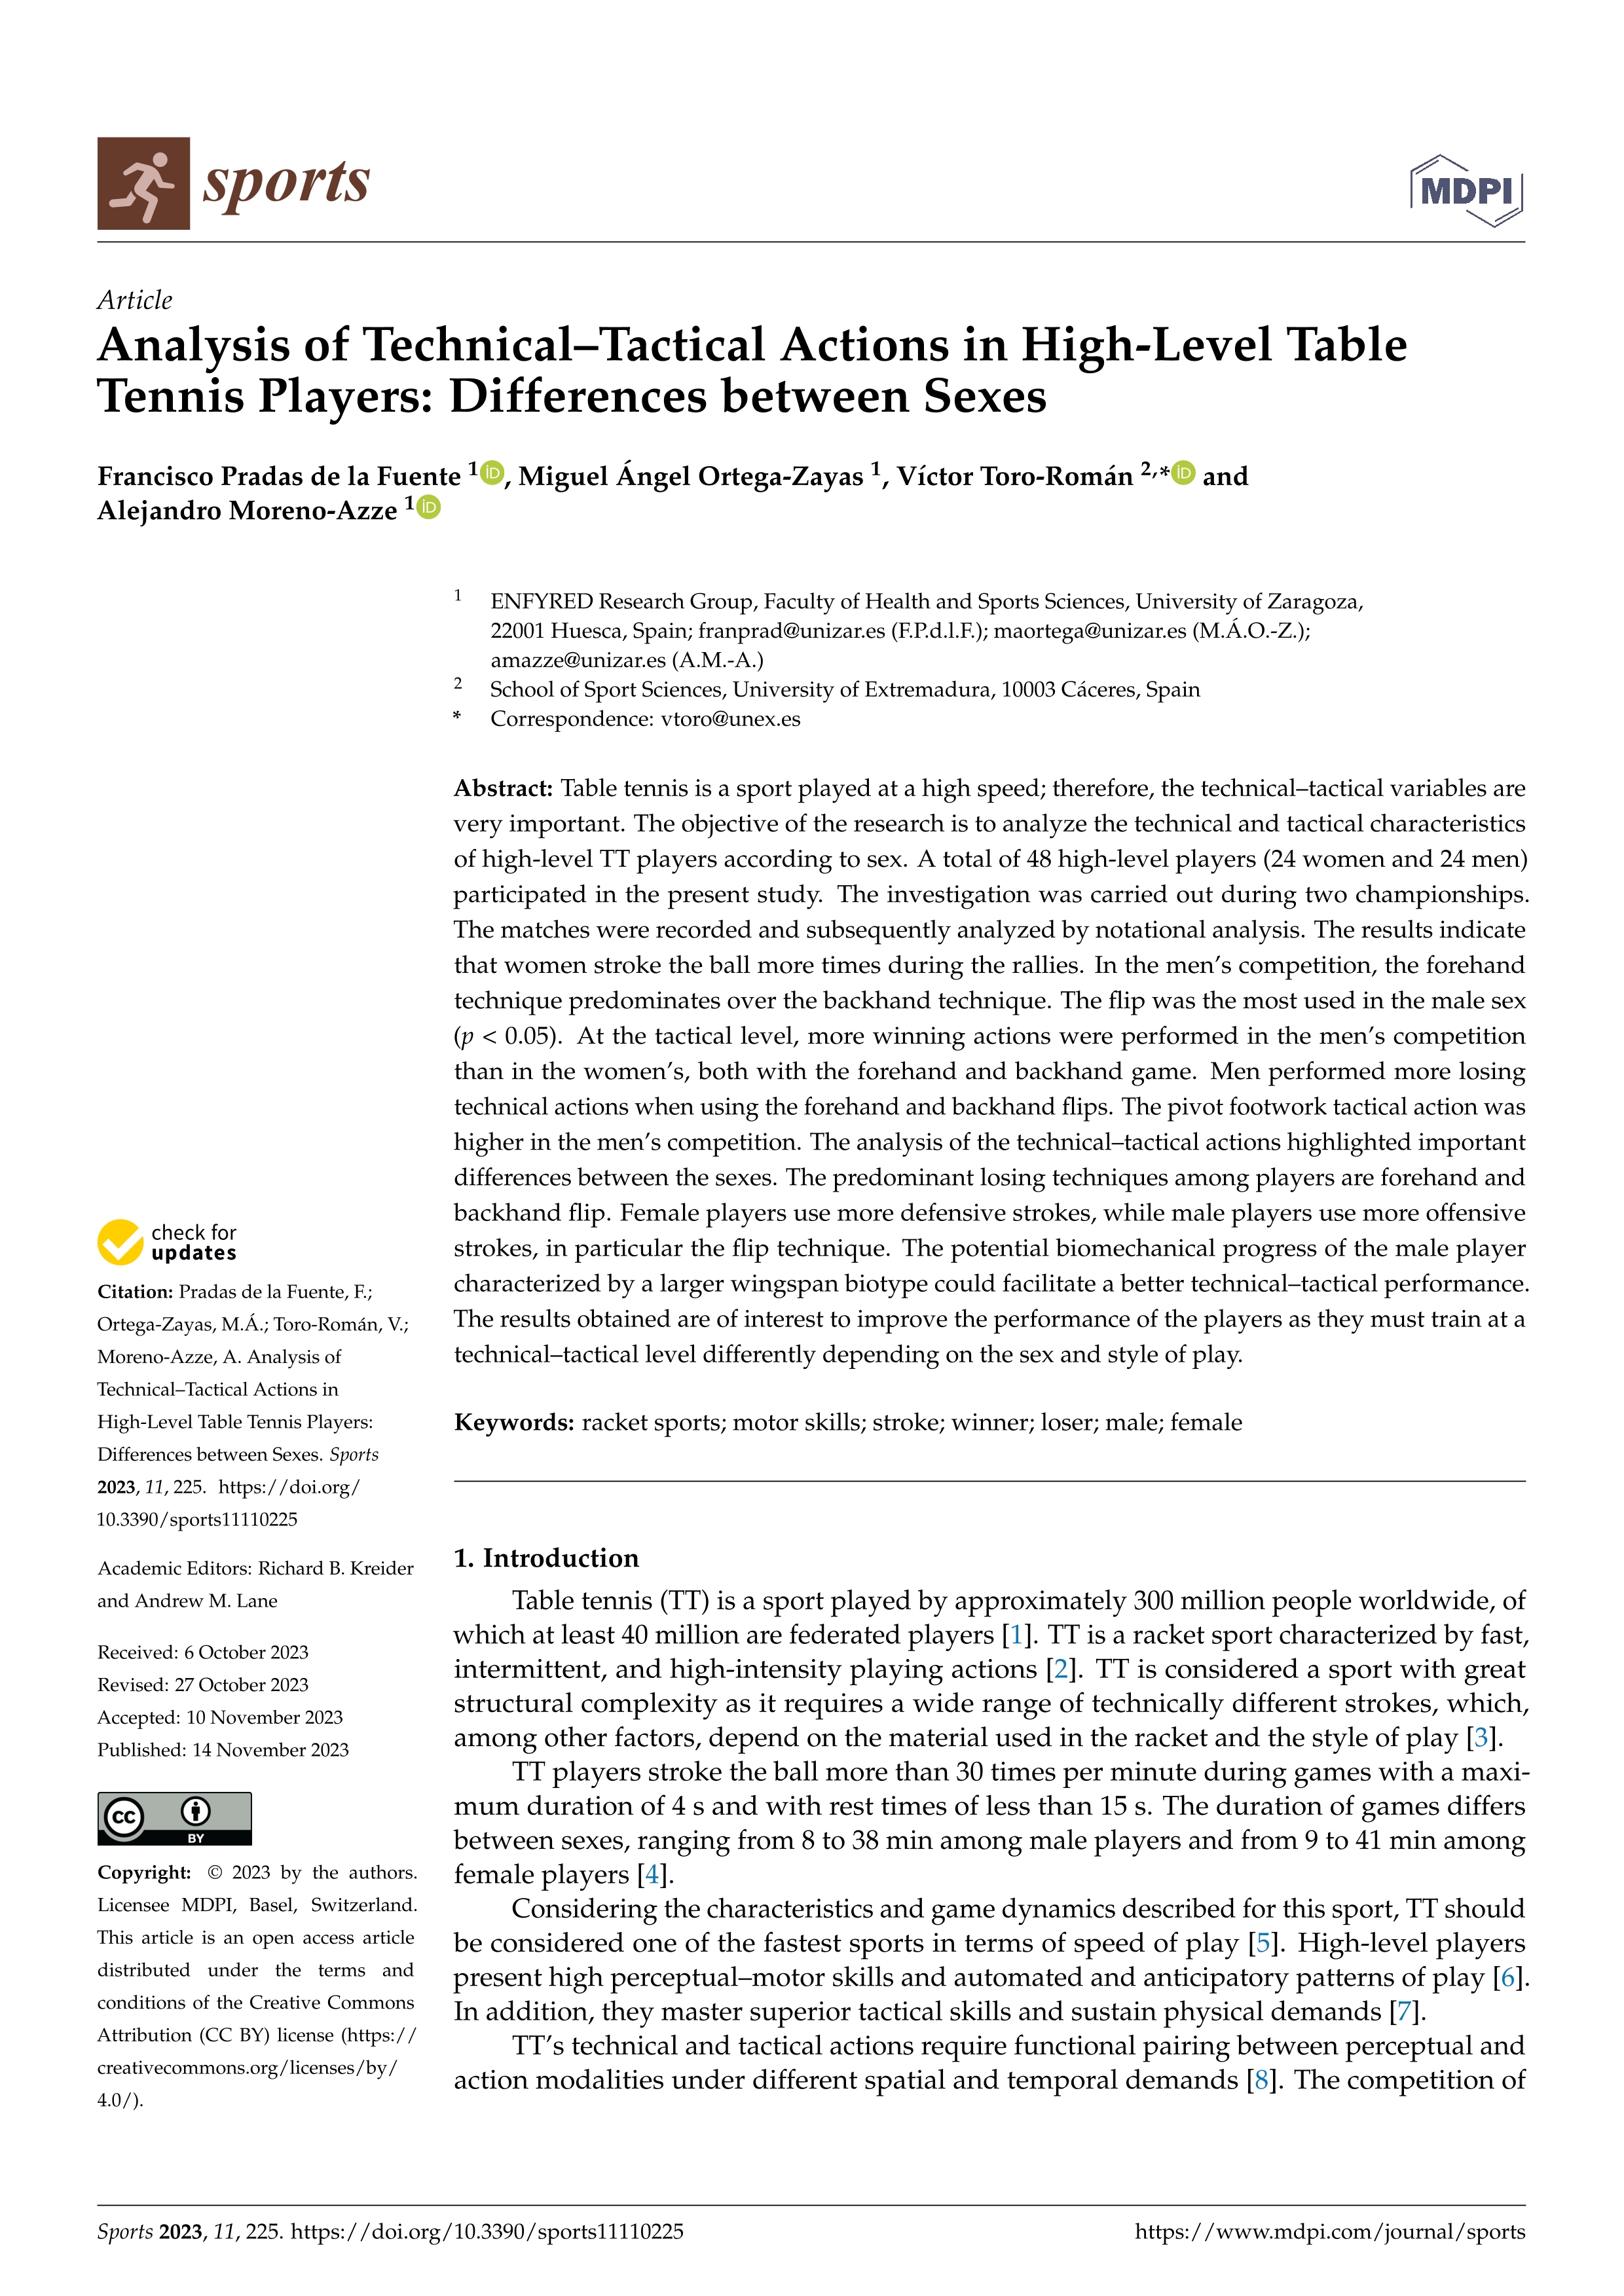 Analysis of technical–tactical actions in high-level table tennis players: differences between sexes